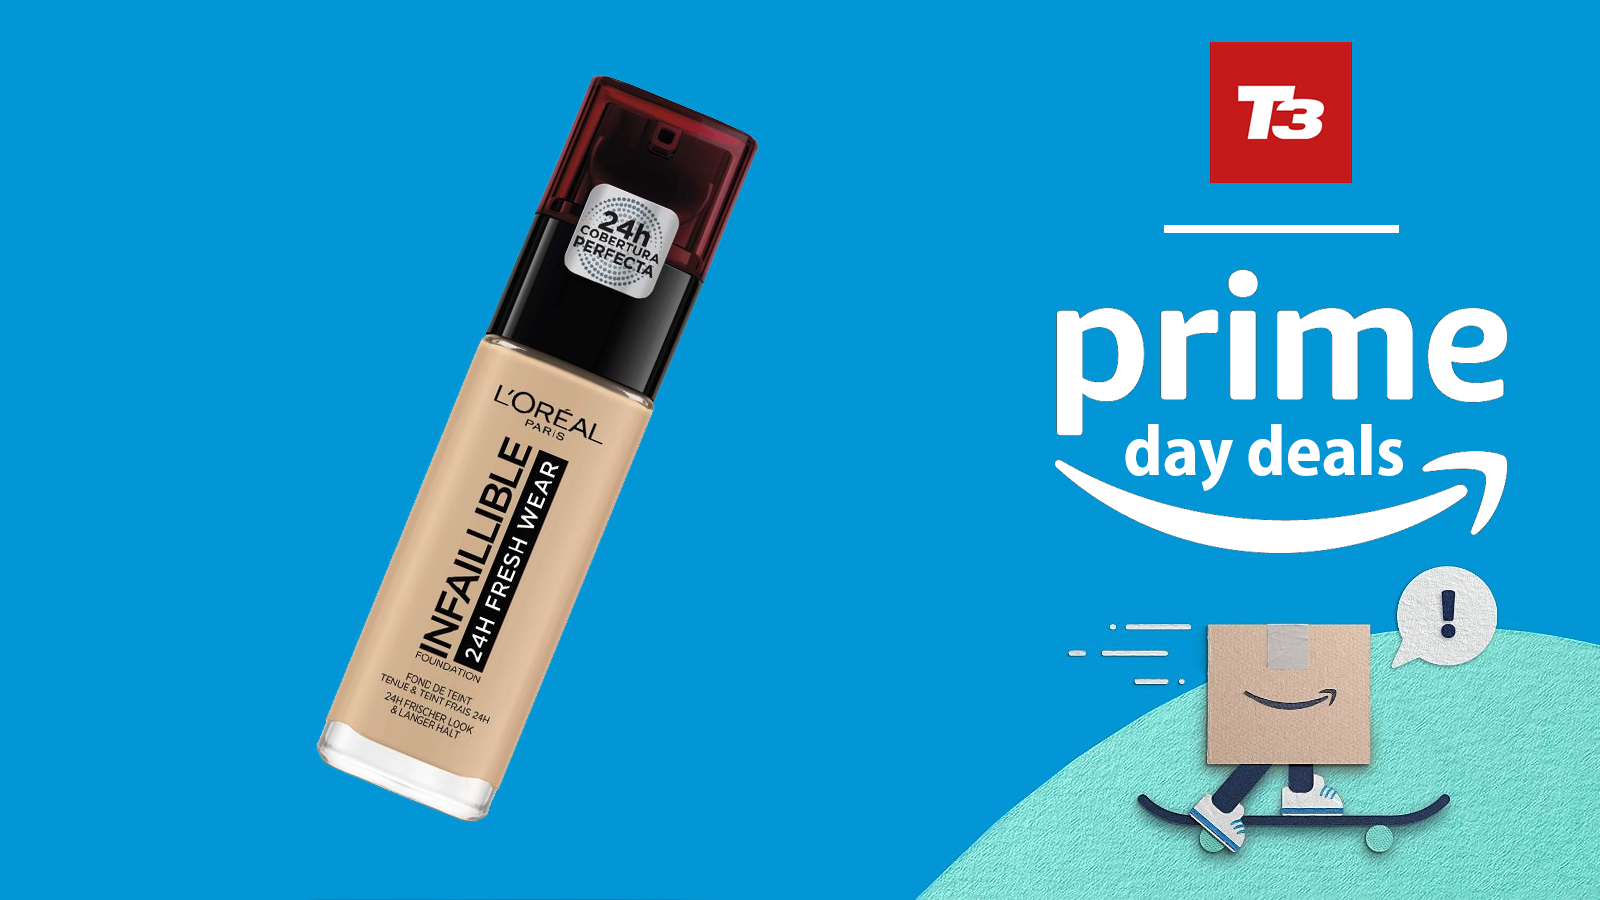 Best Amazon Prime Day beauty deals Elemis, Rimmel, L'Oreal make up and